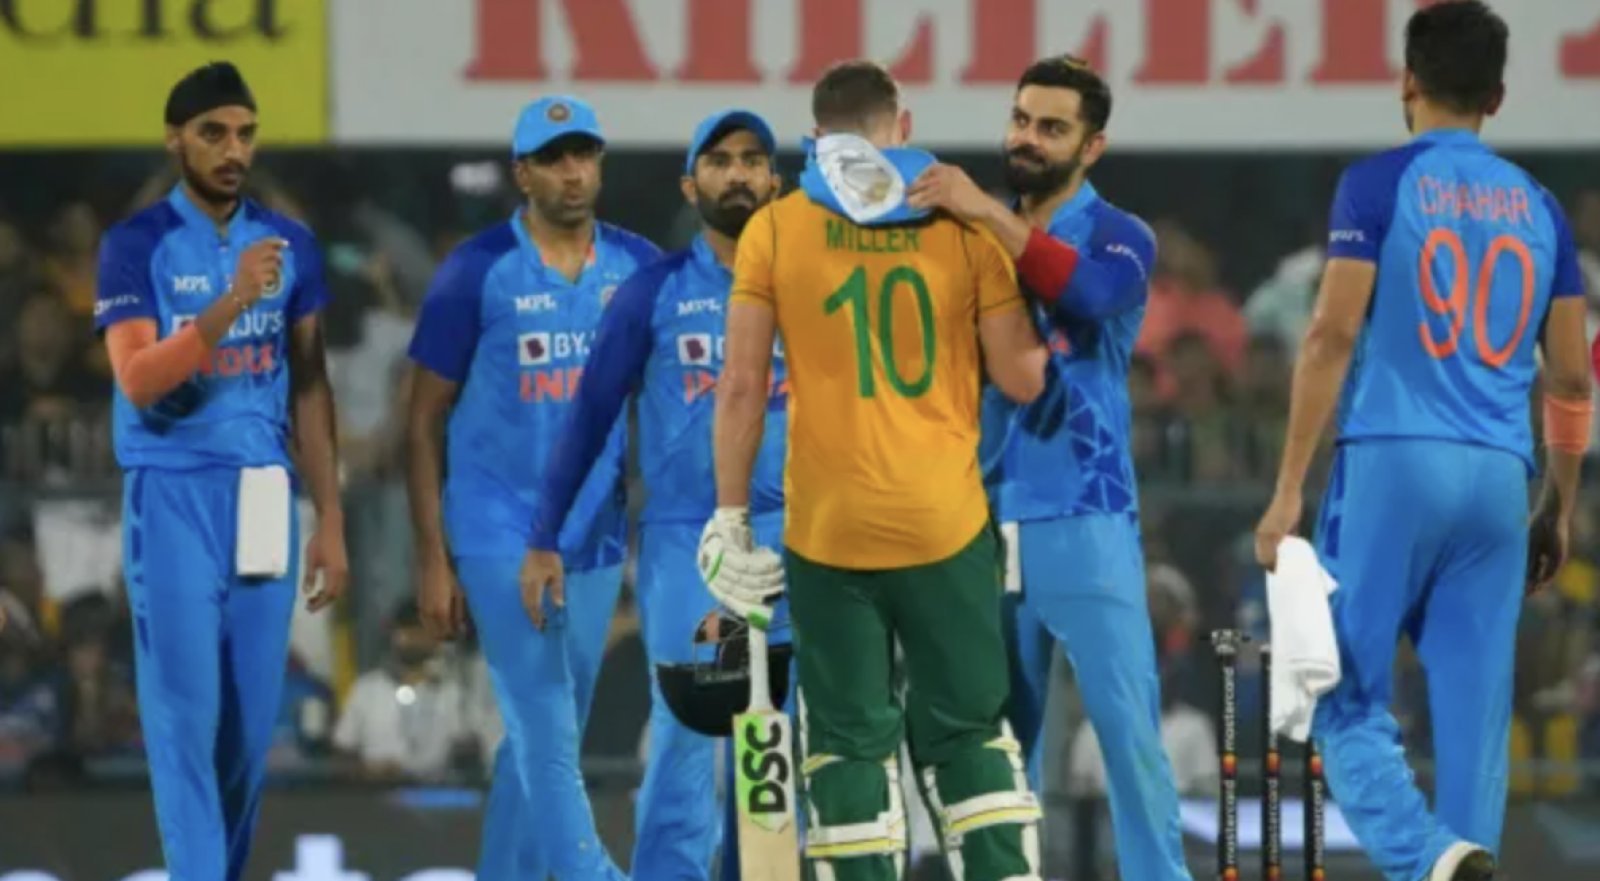 RSA vs IND: After the defeat, fans classed Arshdeep-Siraj, raised demand to drop them from the team